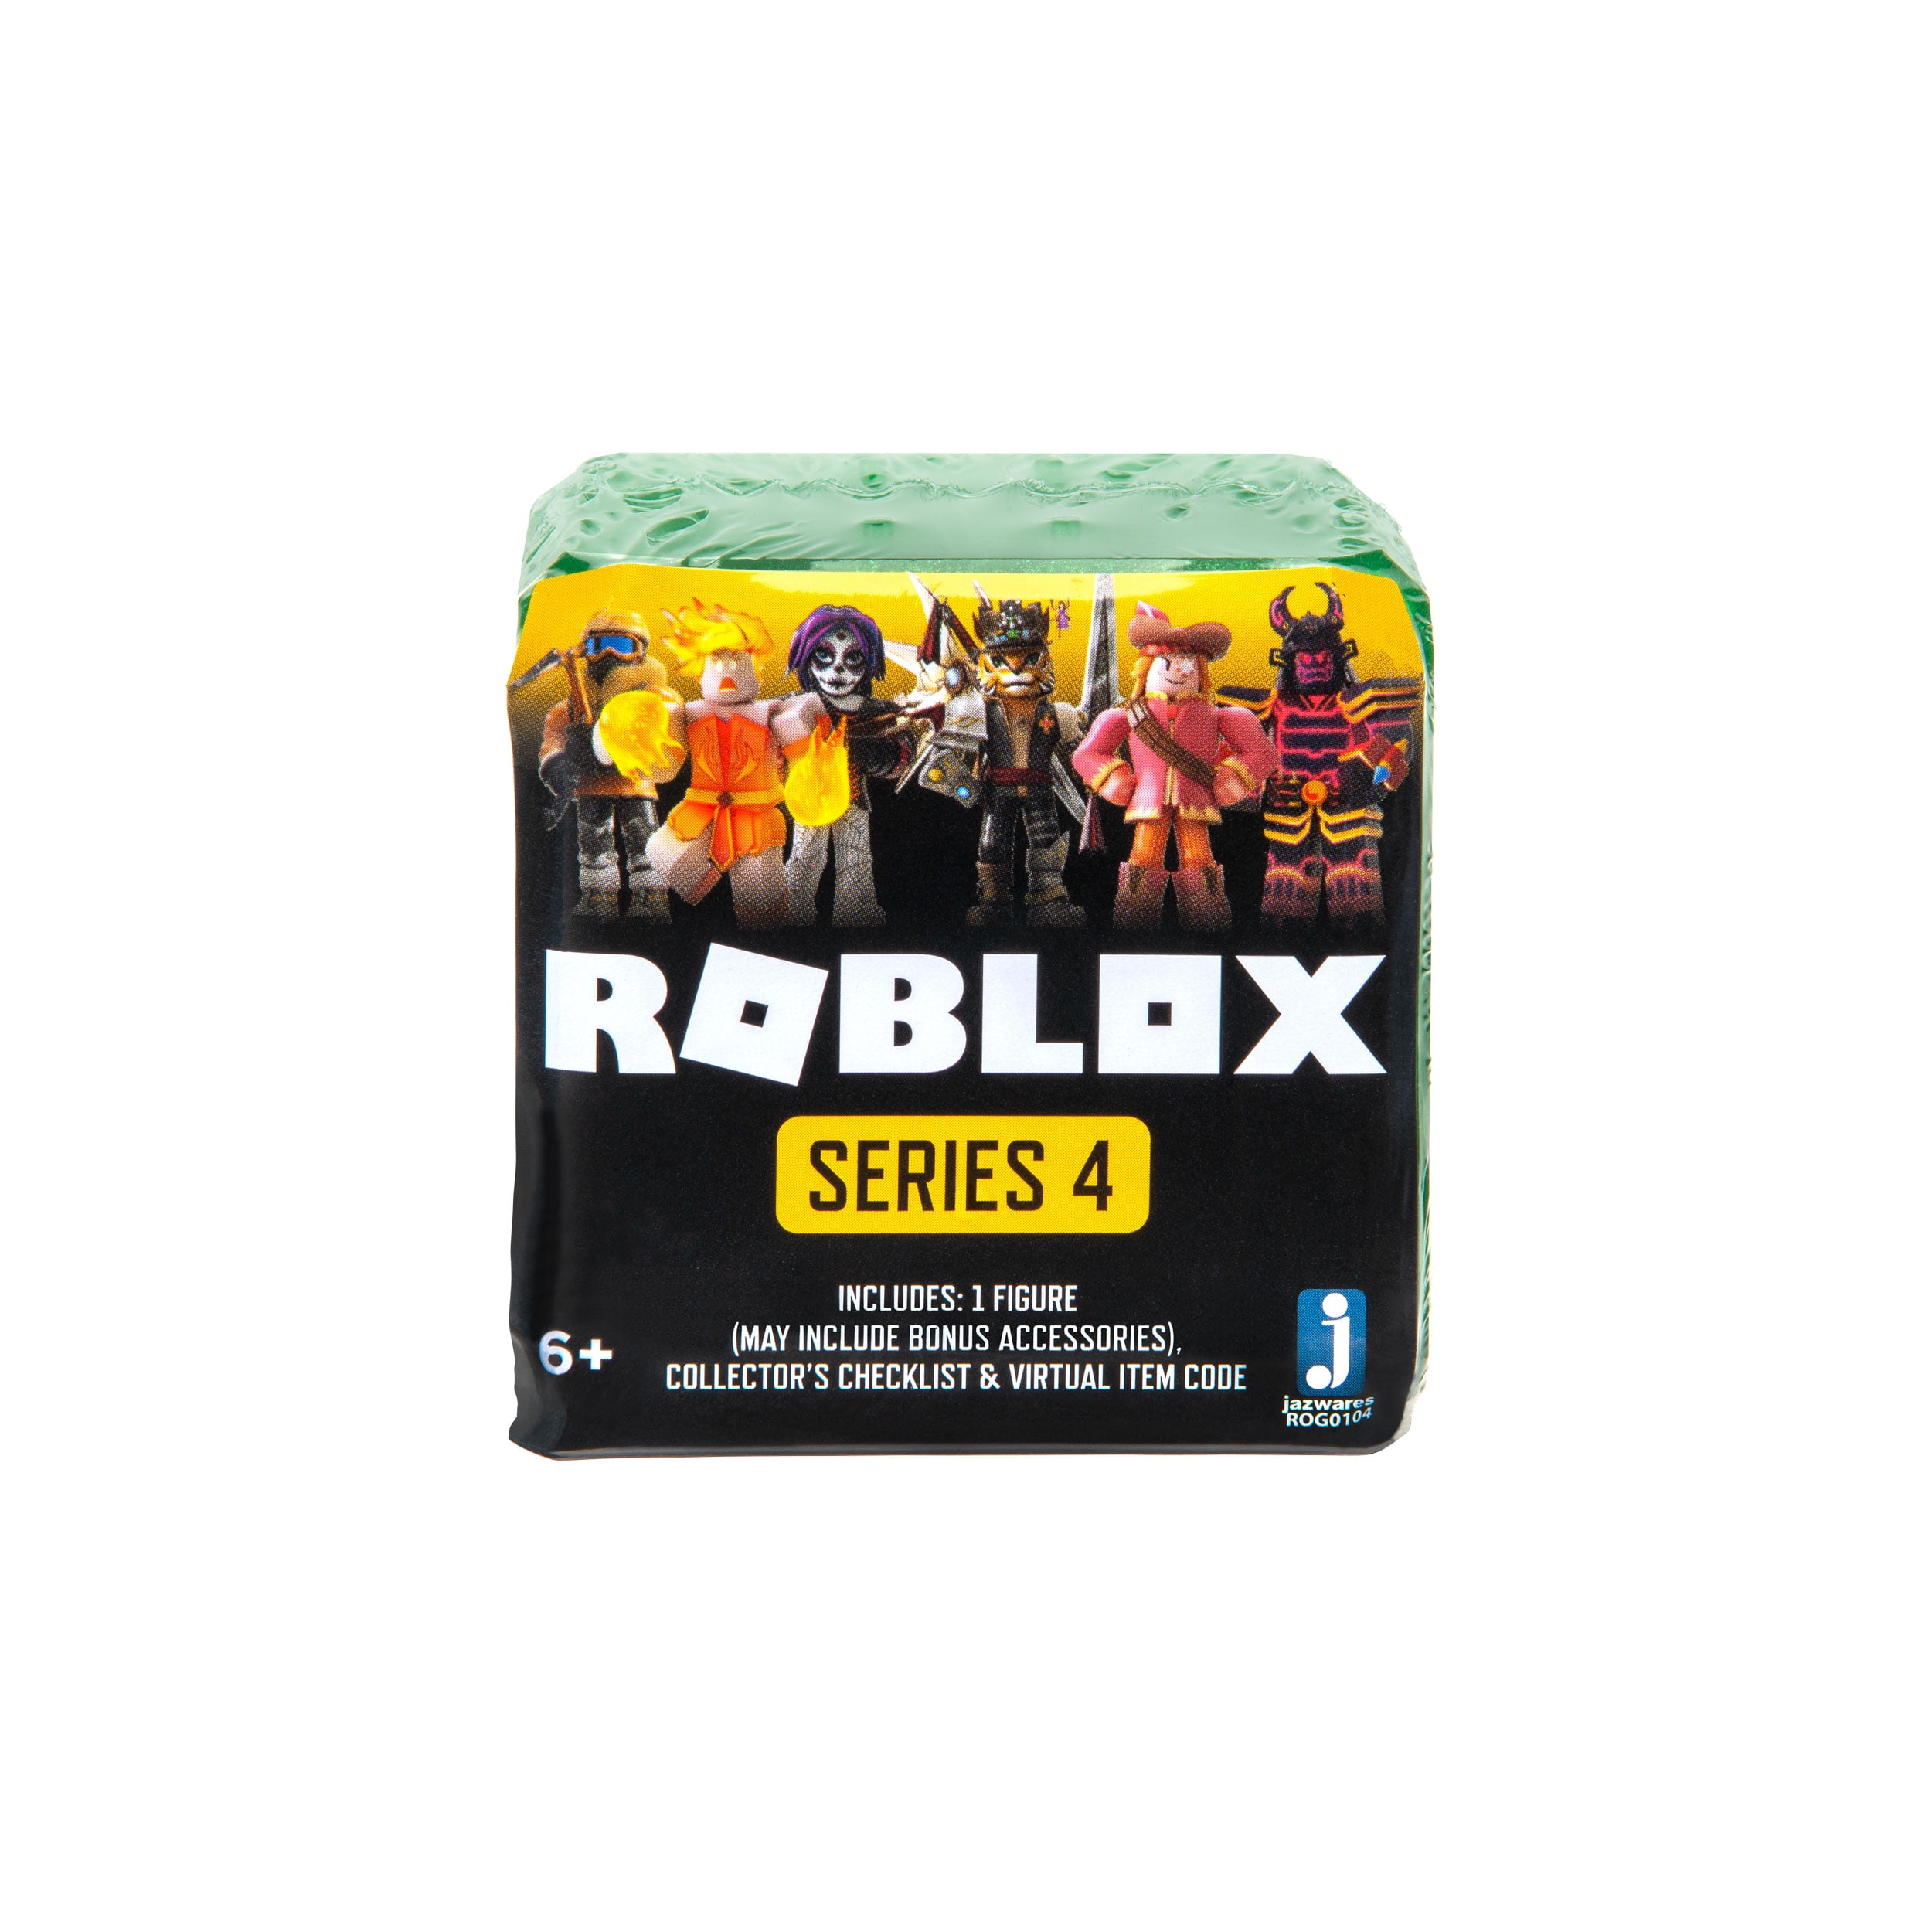 Roblox Celebrity Collection Series 4 Mystery Figure Includes 1 Figure Exclusive Virtual Item Walmart Com Walmart Com - action figures roblox celebrity mystery figure series 1 assortment